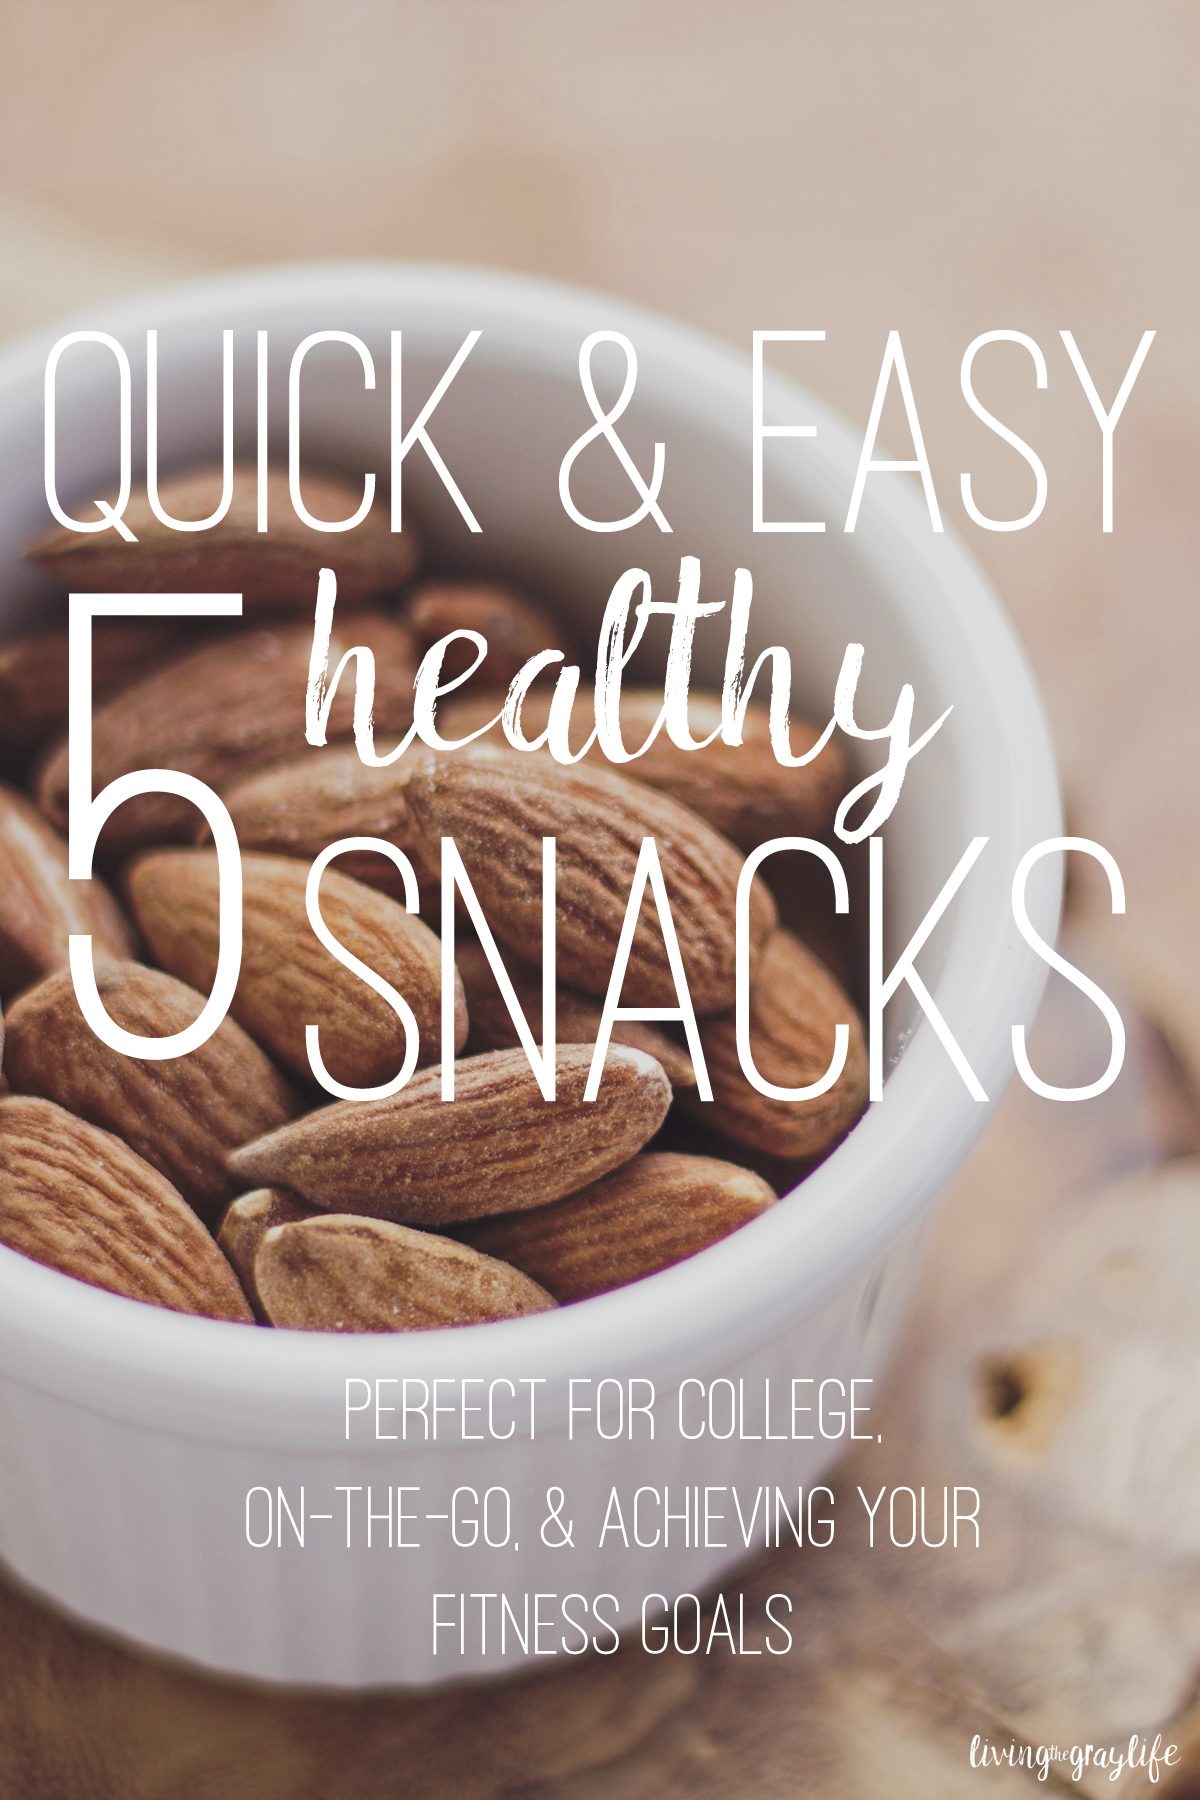 5 Healthy Snacks Ideas | Perfect for college students on a budget